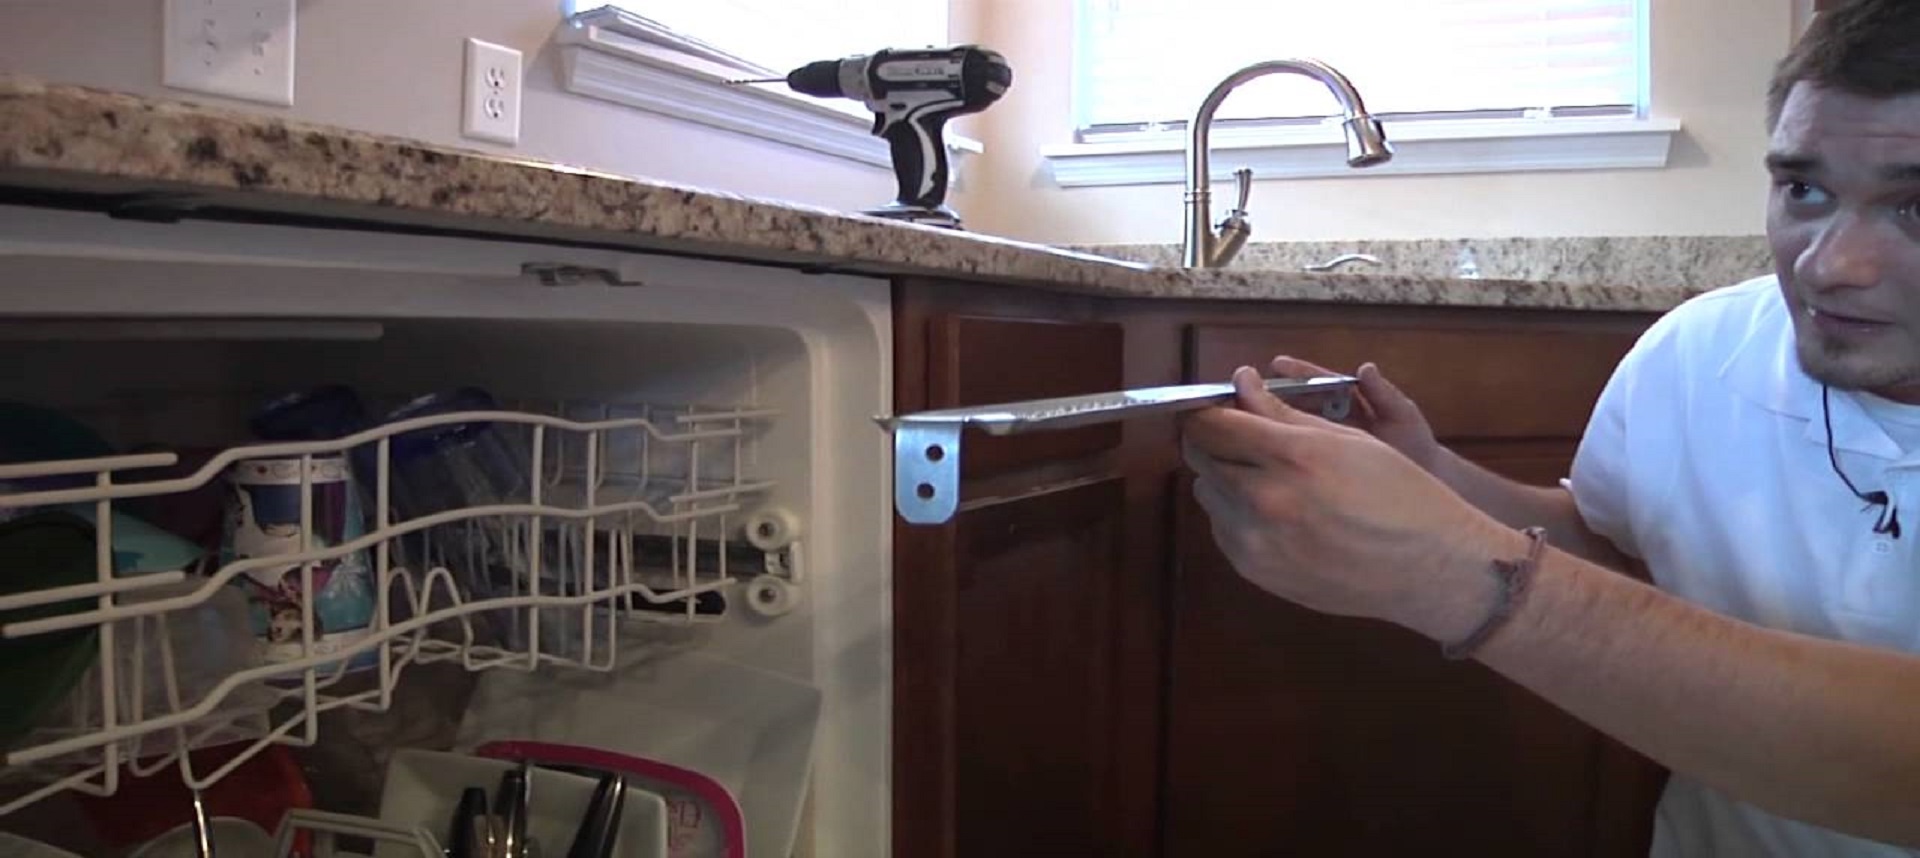 different ways to anchor a kitchen sink to countertop